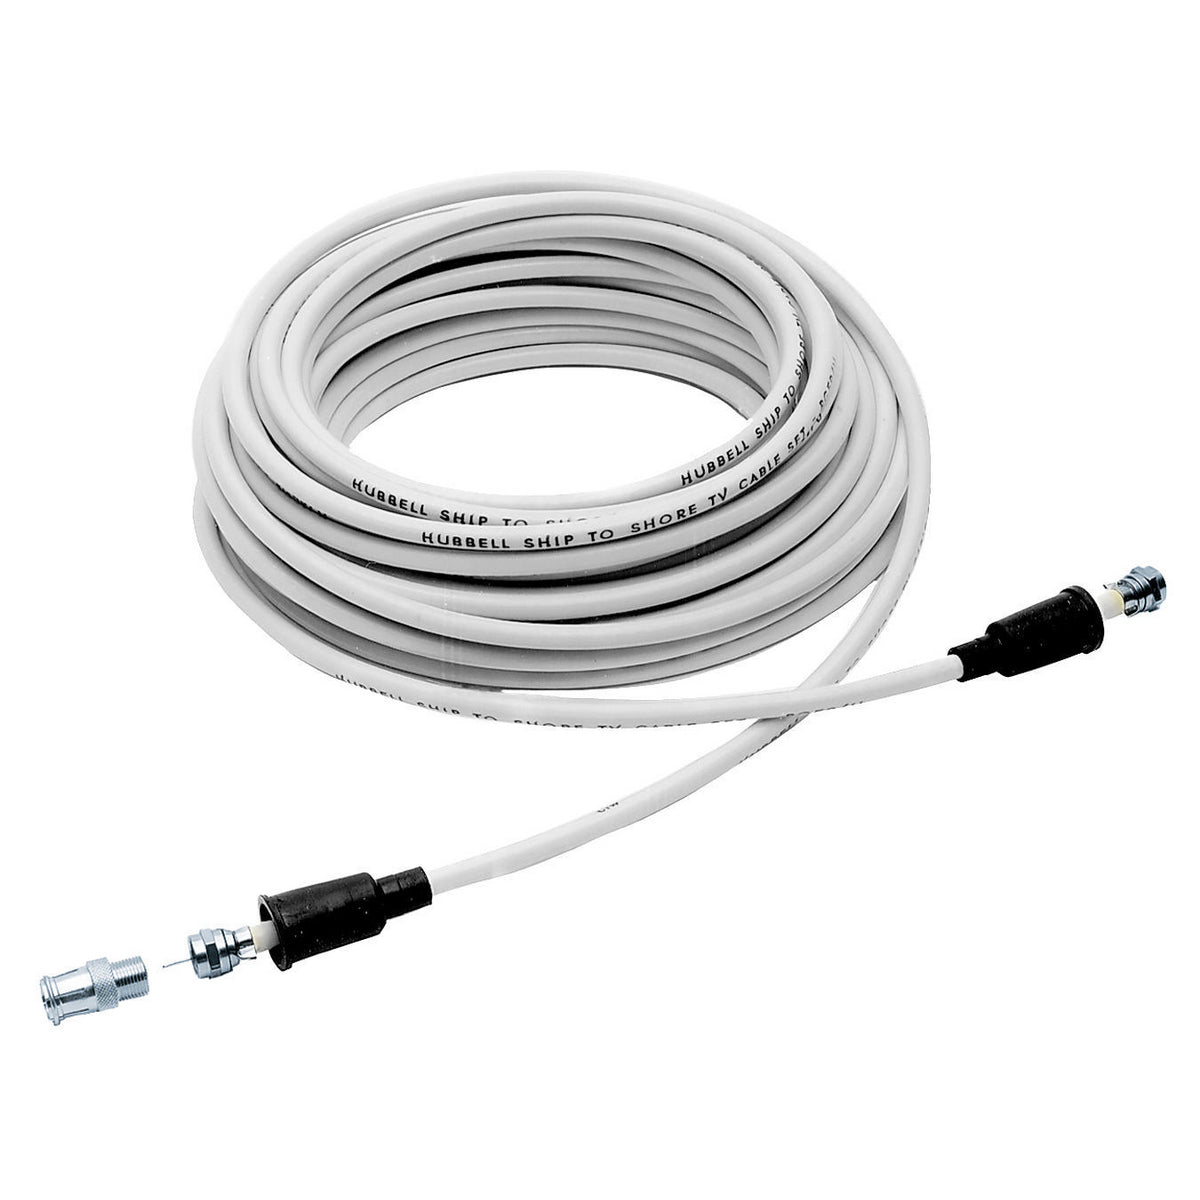 Hubbell HUBTV99W 50 Foot White TV Shore Cord